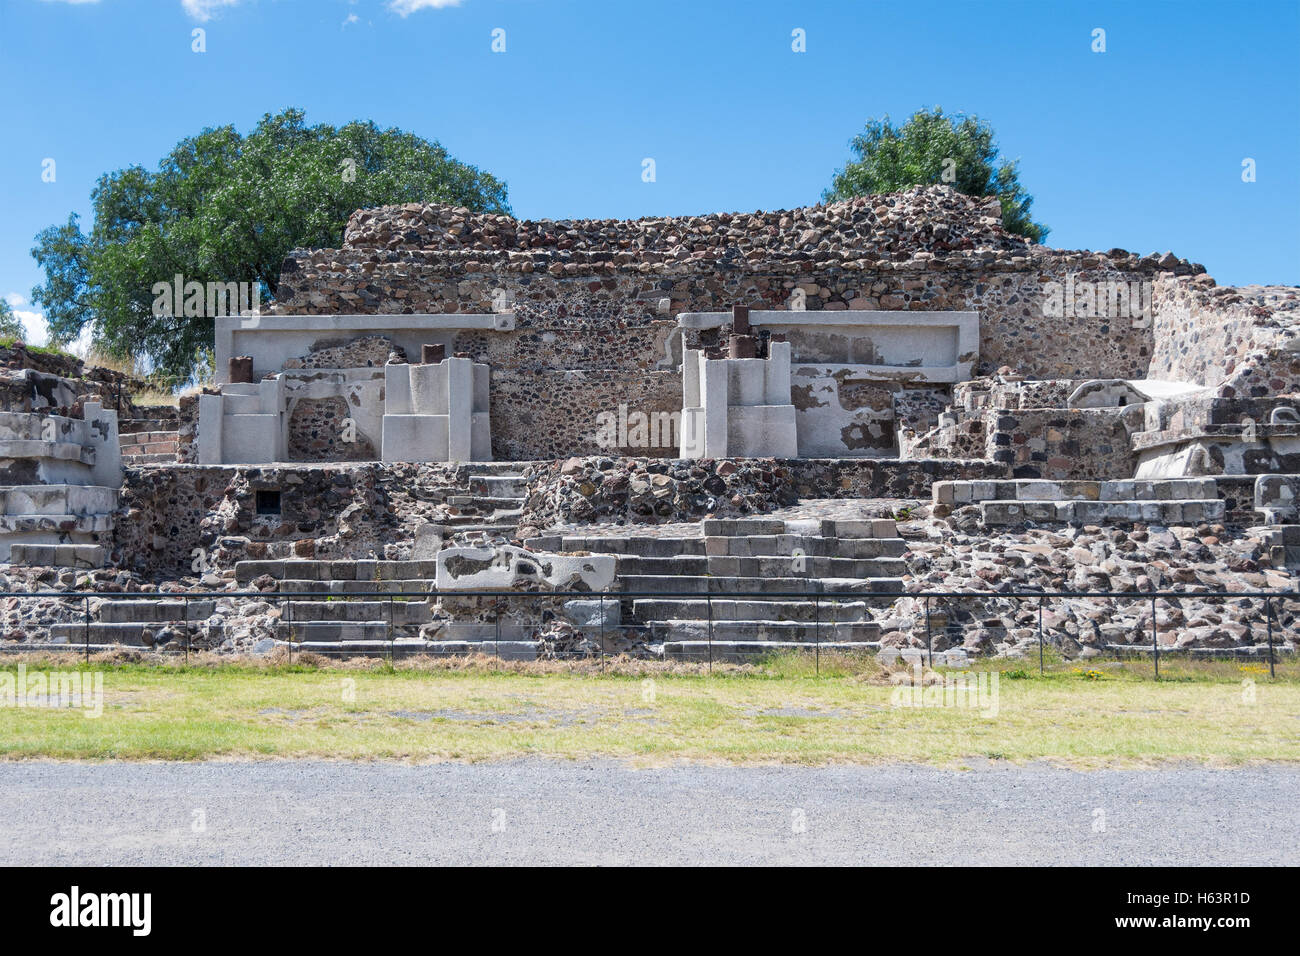 The Palace of the Jaguars is located west of the Plaza of the Moon, in San Juan Teotihuacan, Mexico. Stock Photo